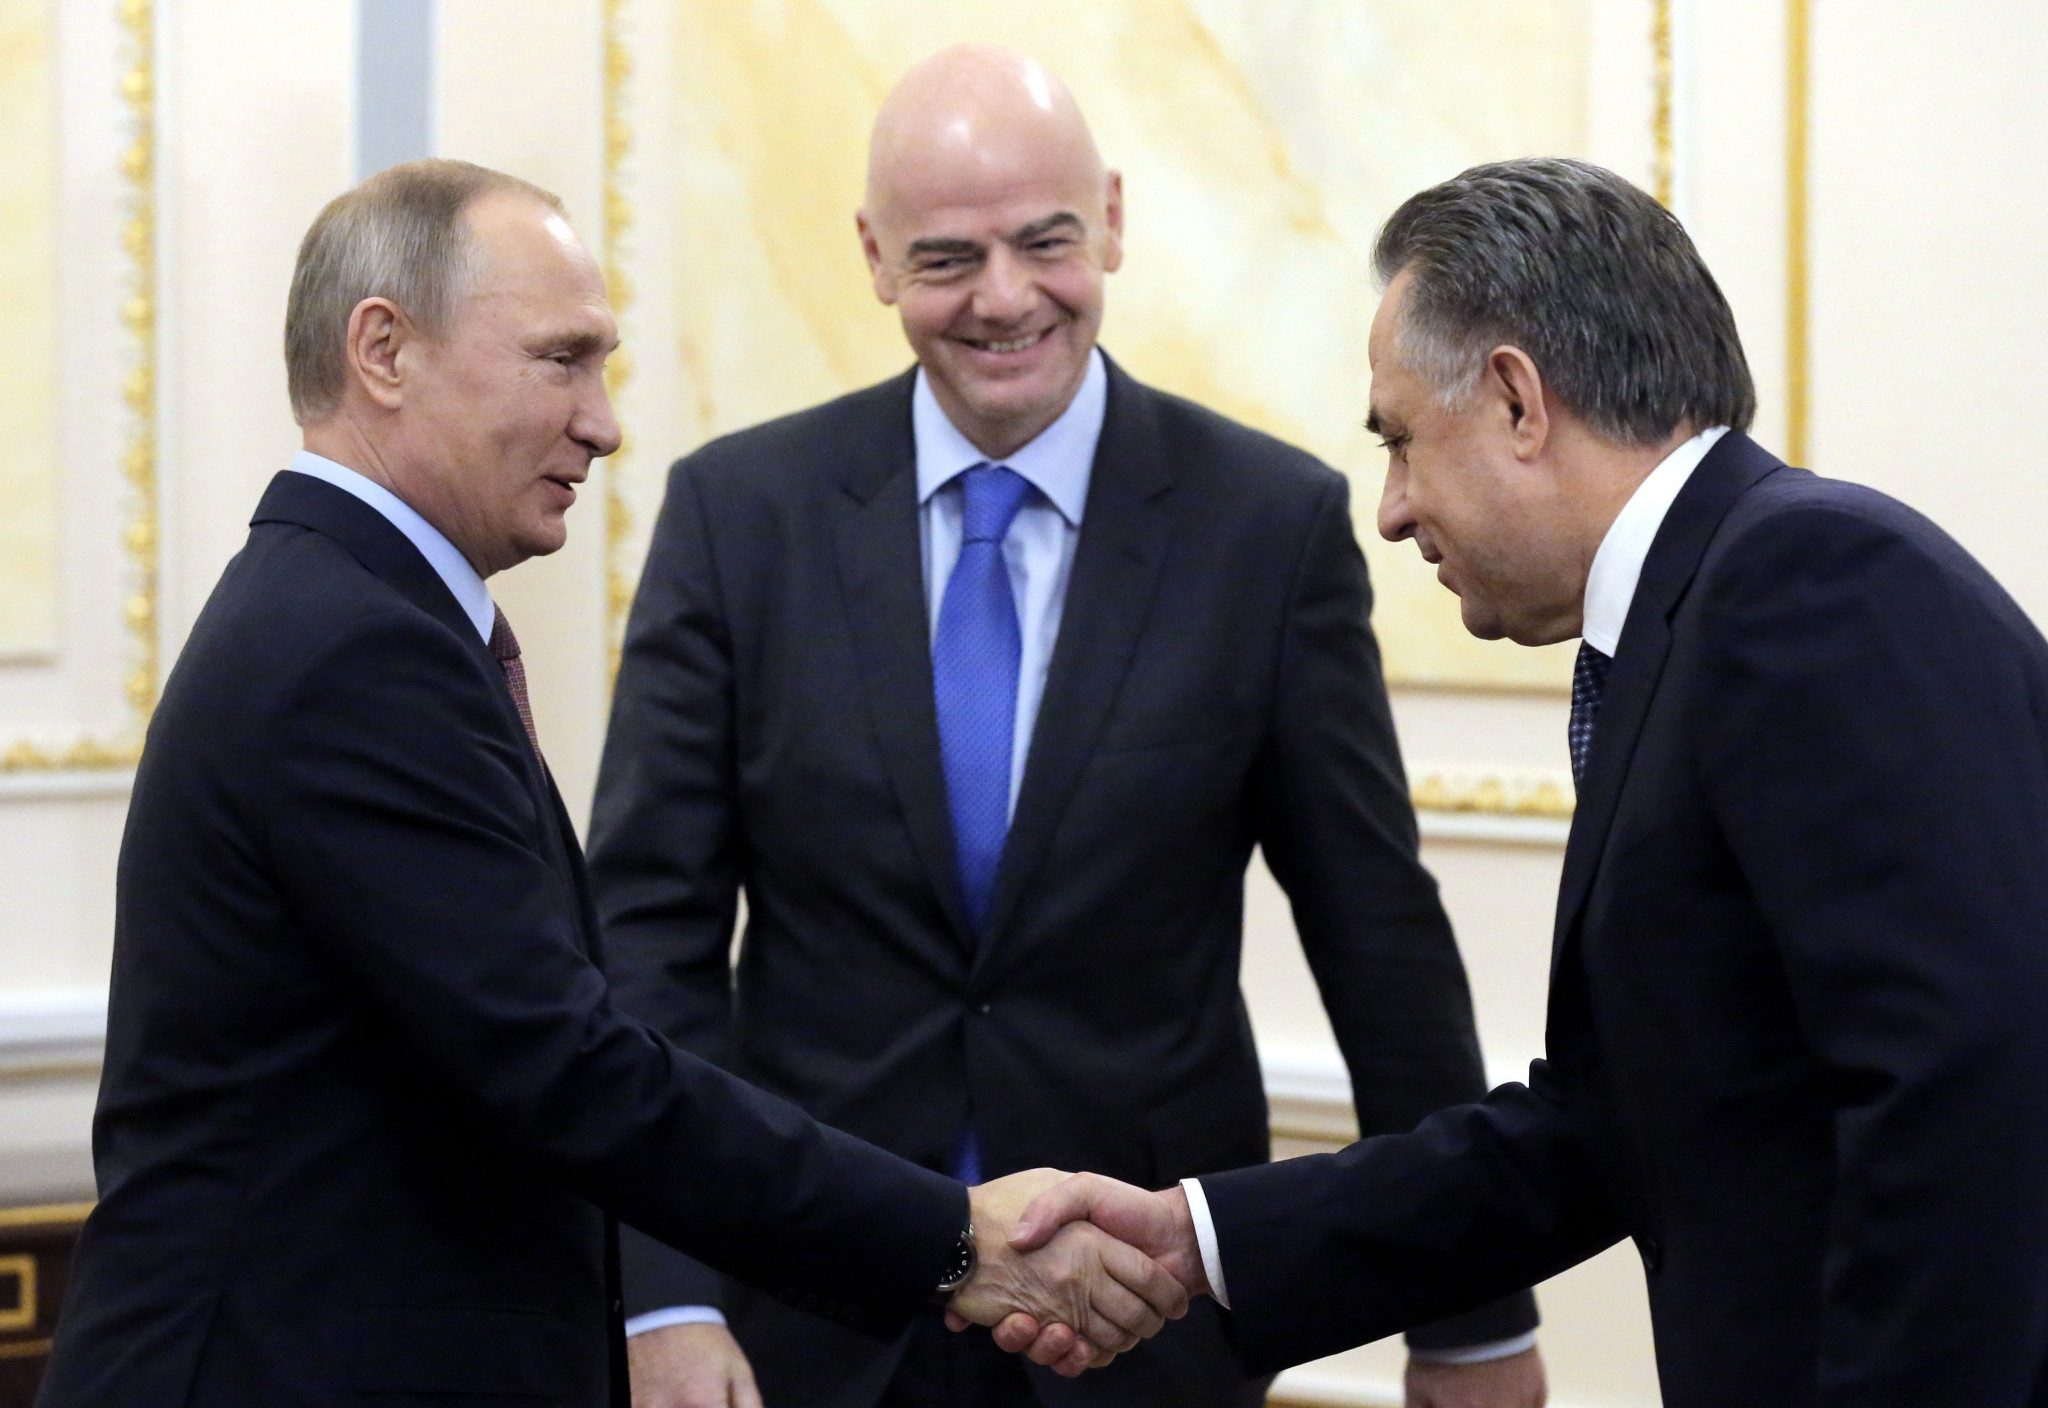 Vladimir Putin, left, and Vitaly Mutko, right, either side of FIFA President Gianni Infantino ©Getty Images